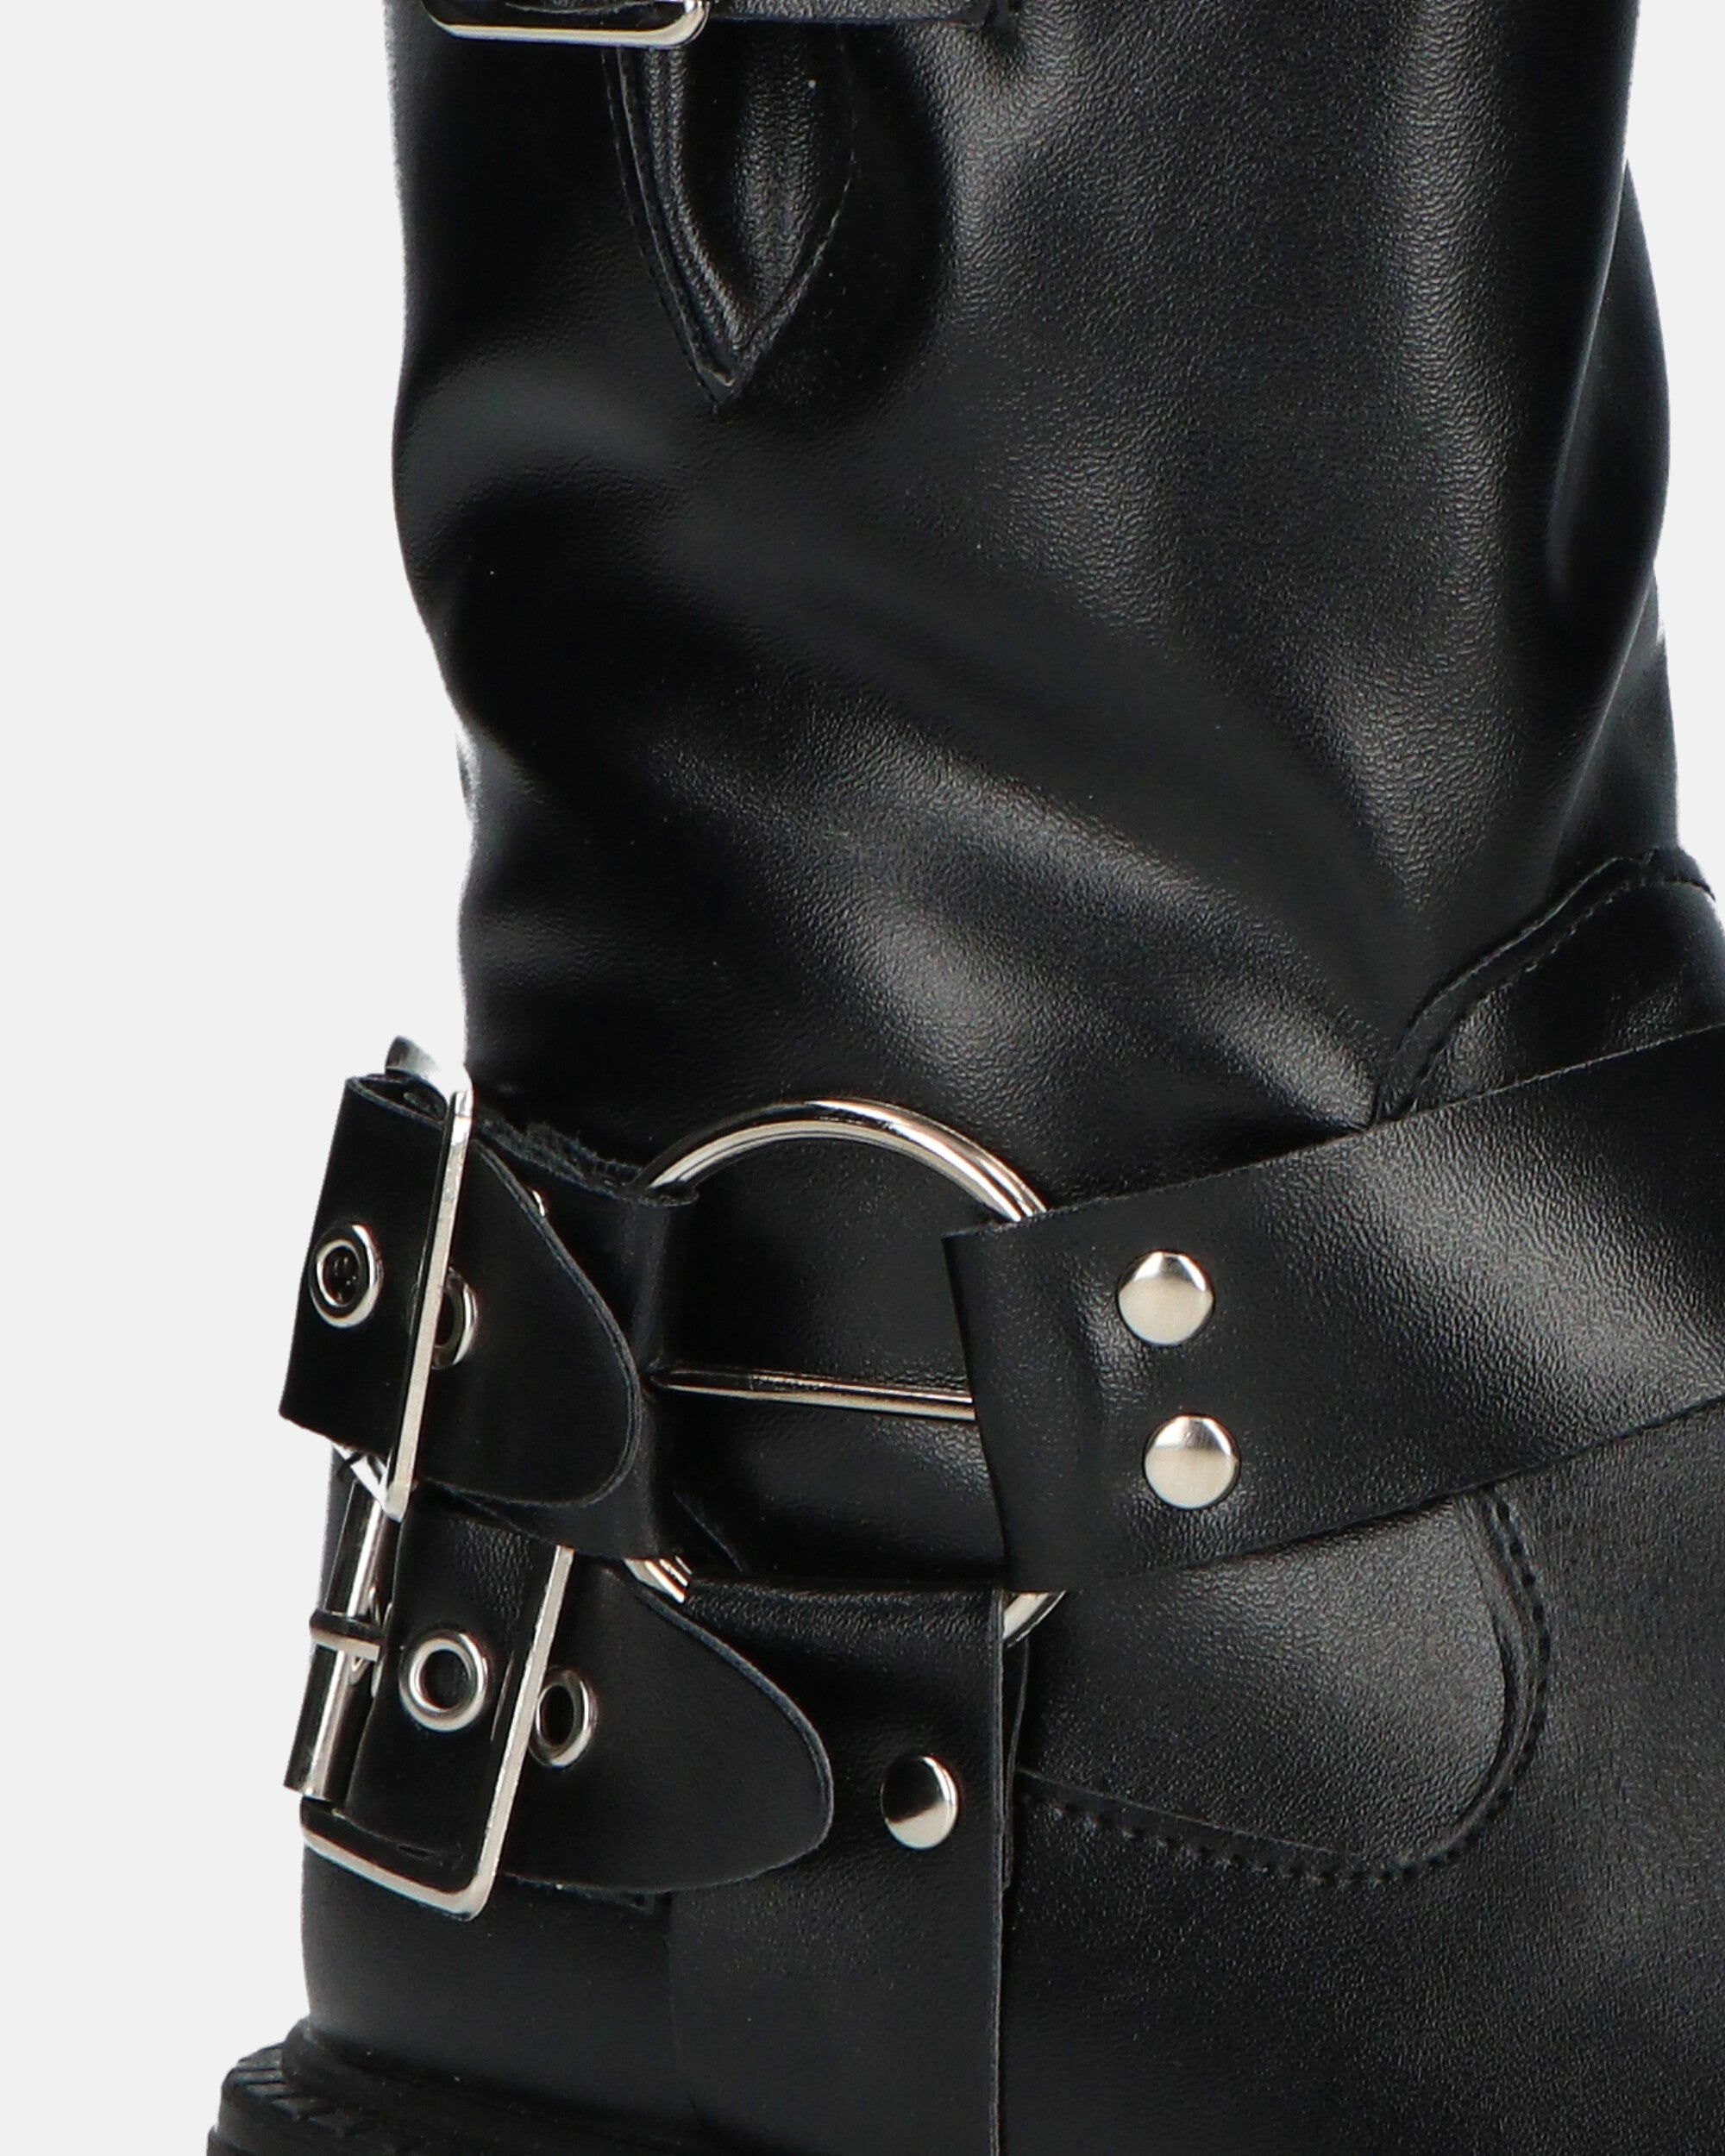 RYOKO - black ankle boots with studs and straps